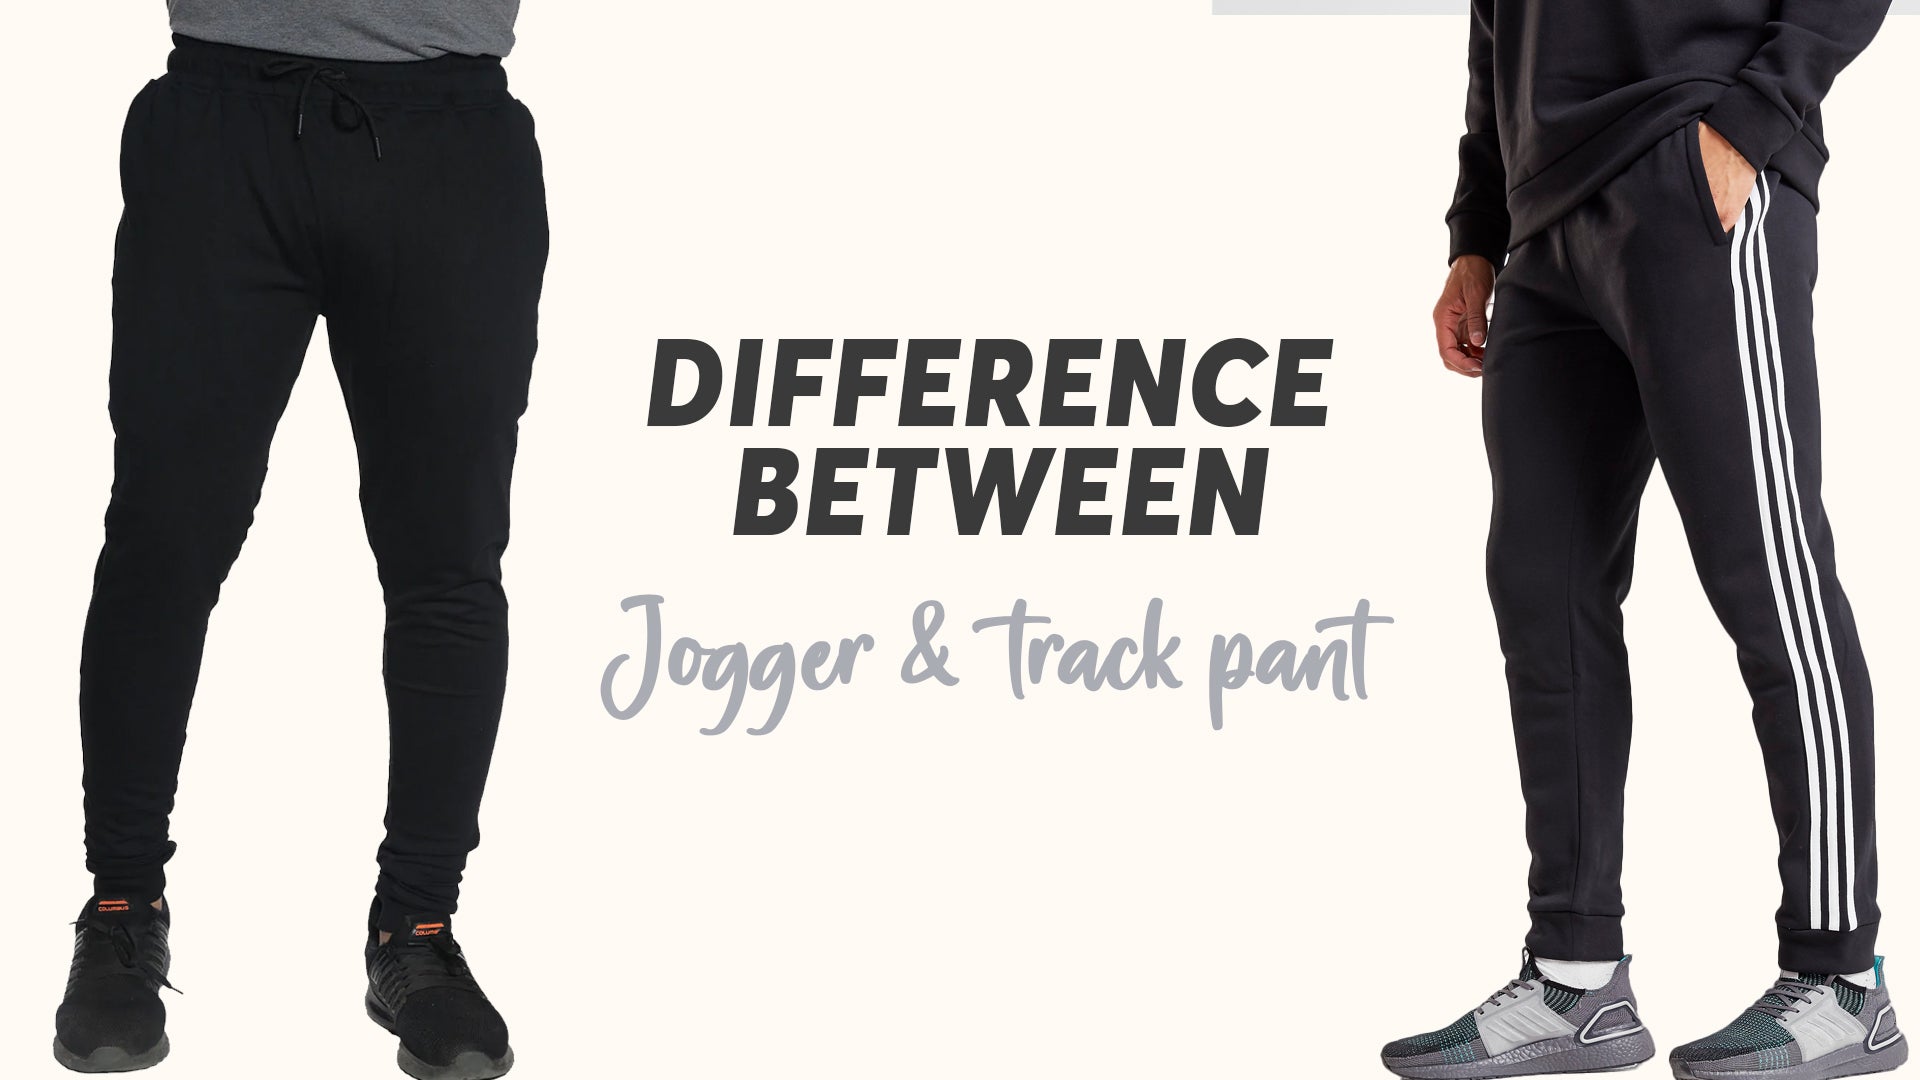 Men's Track Pants Vs Sweatpants: Which is the Better Option?